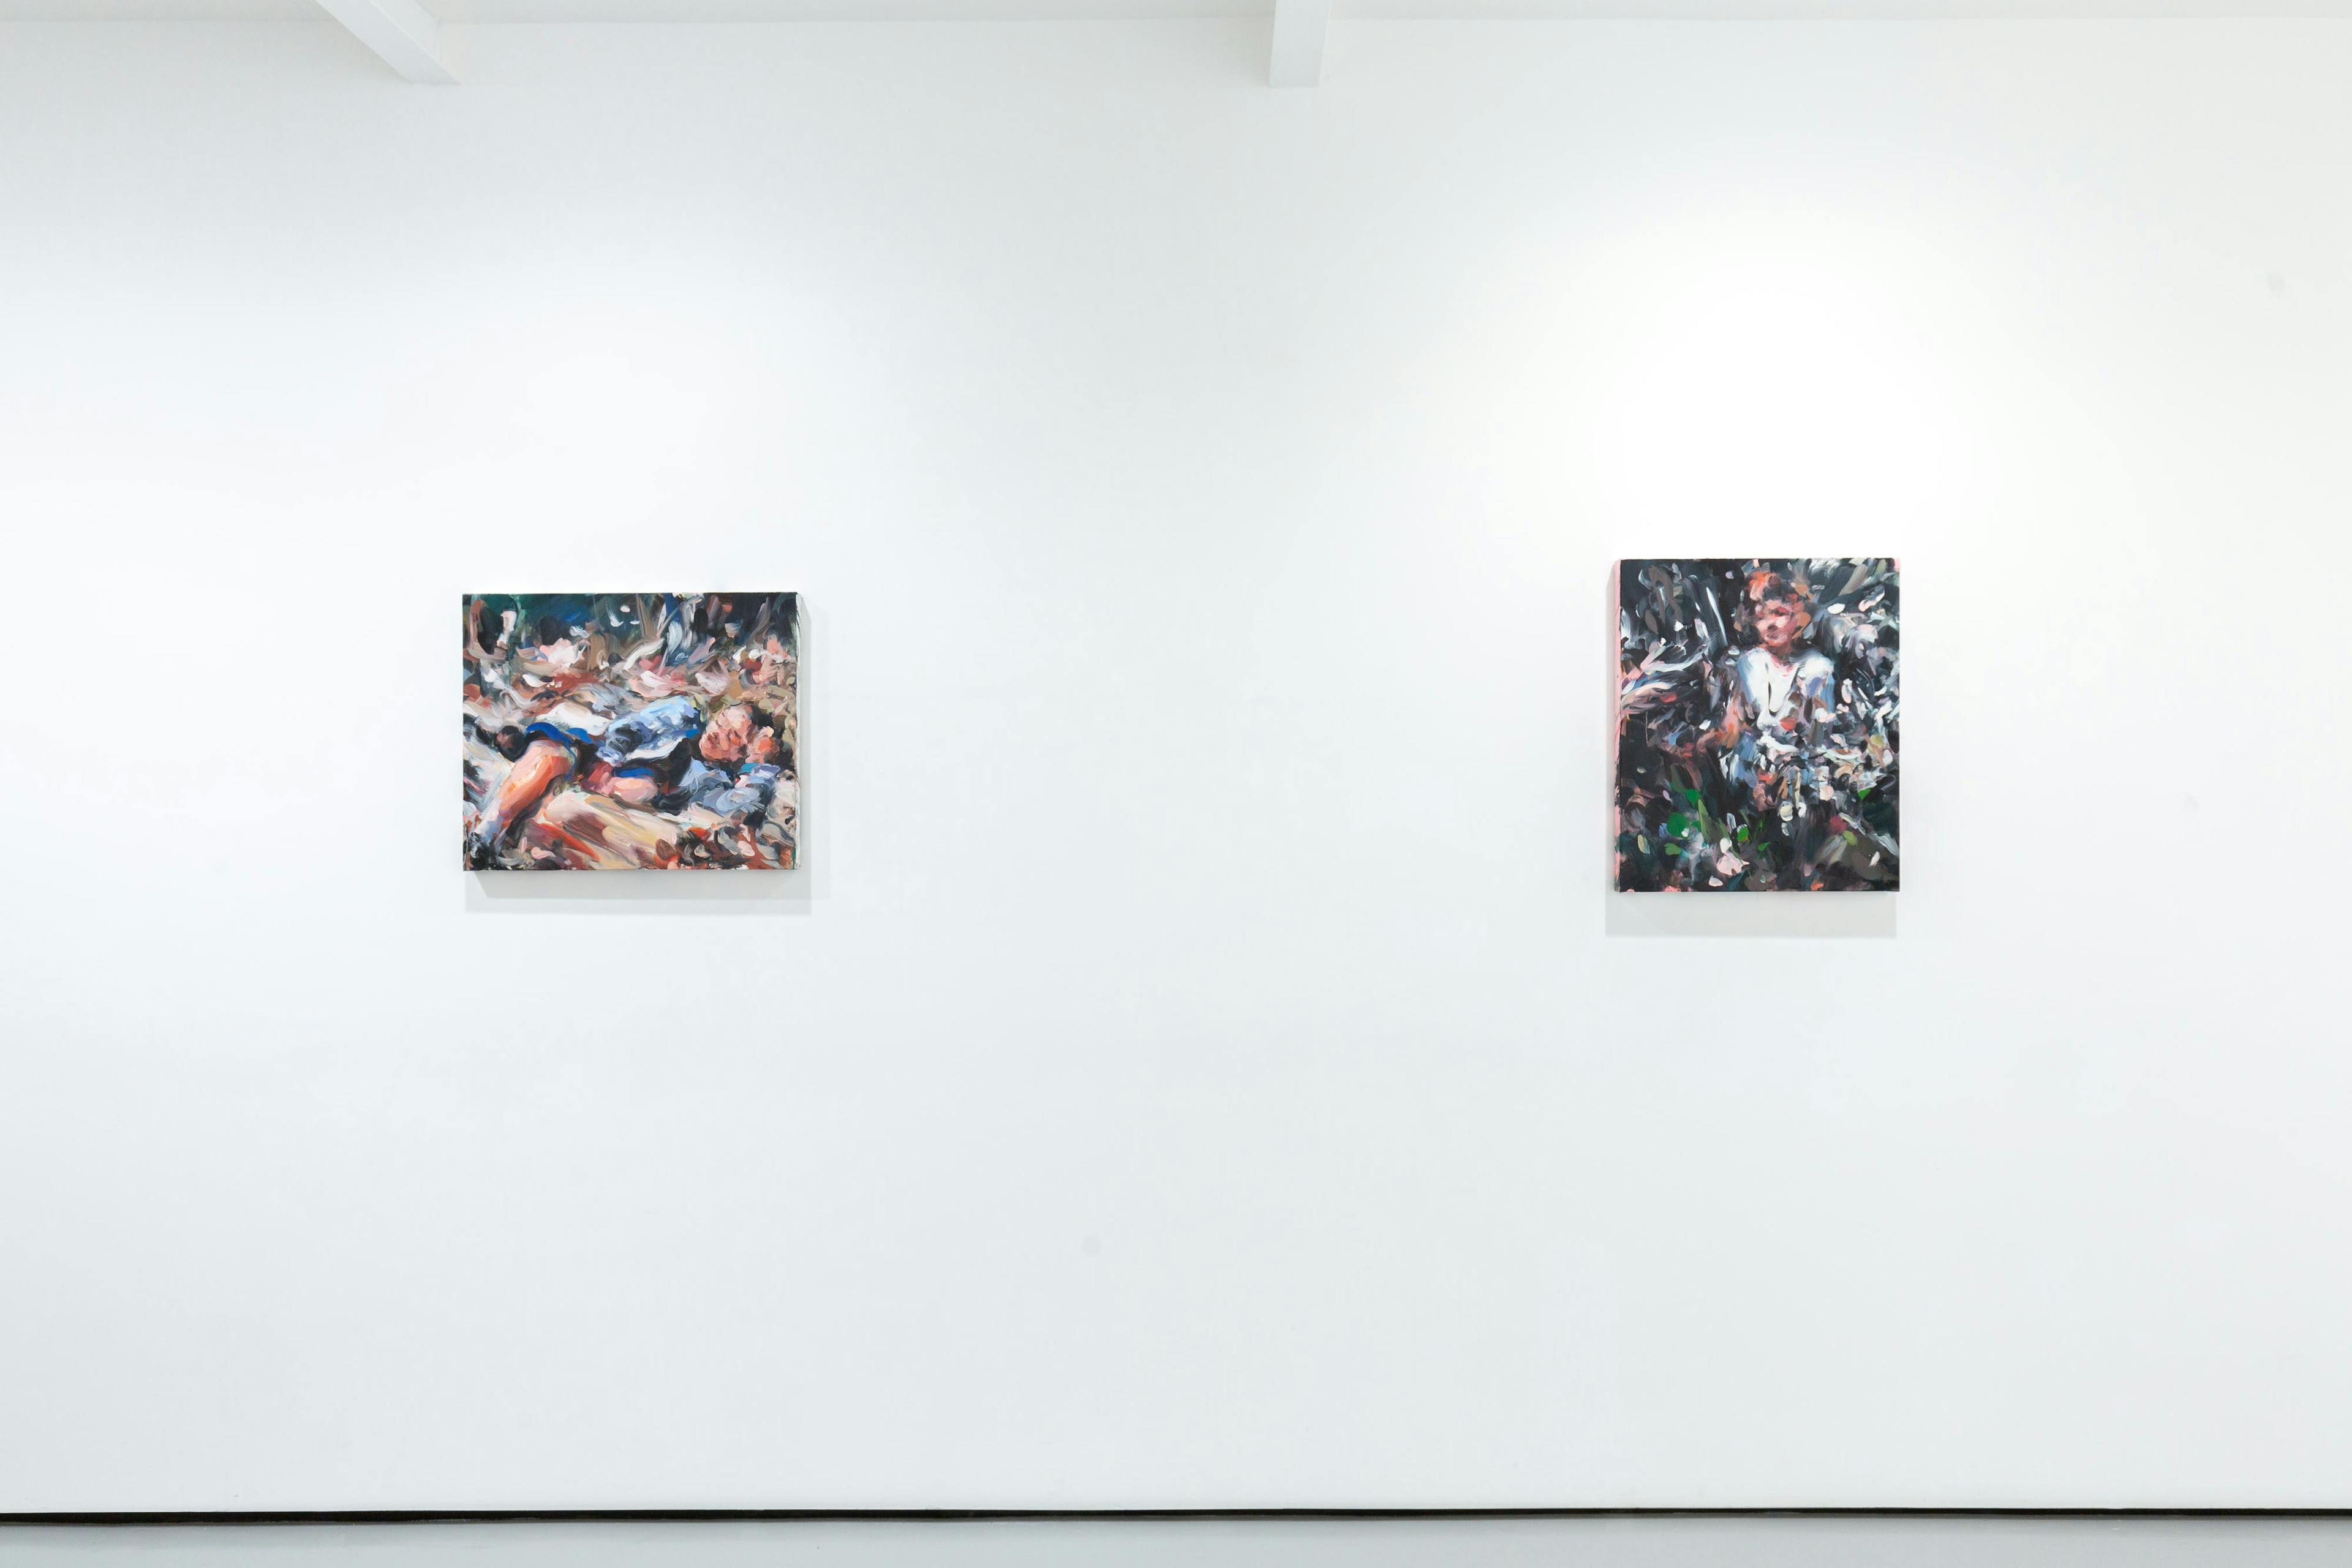 Installation shots of Laura Lancasters solo exhibition 'In Dreams' at Workplace | London